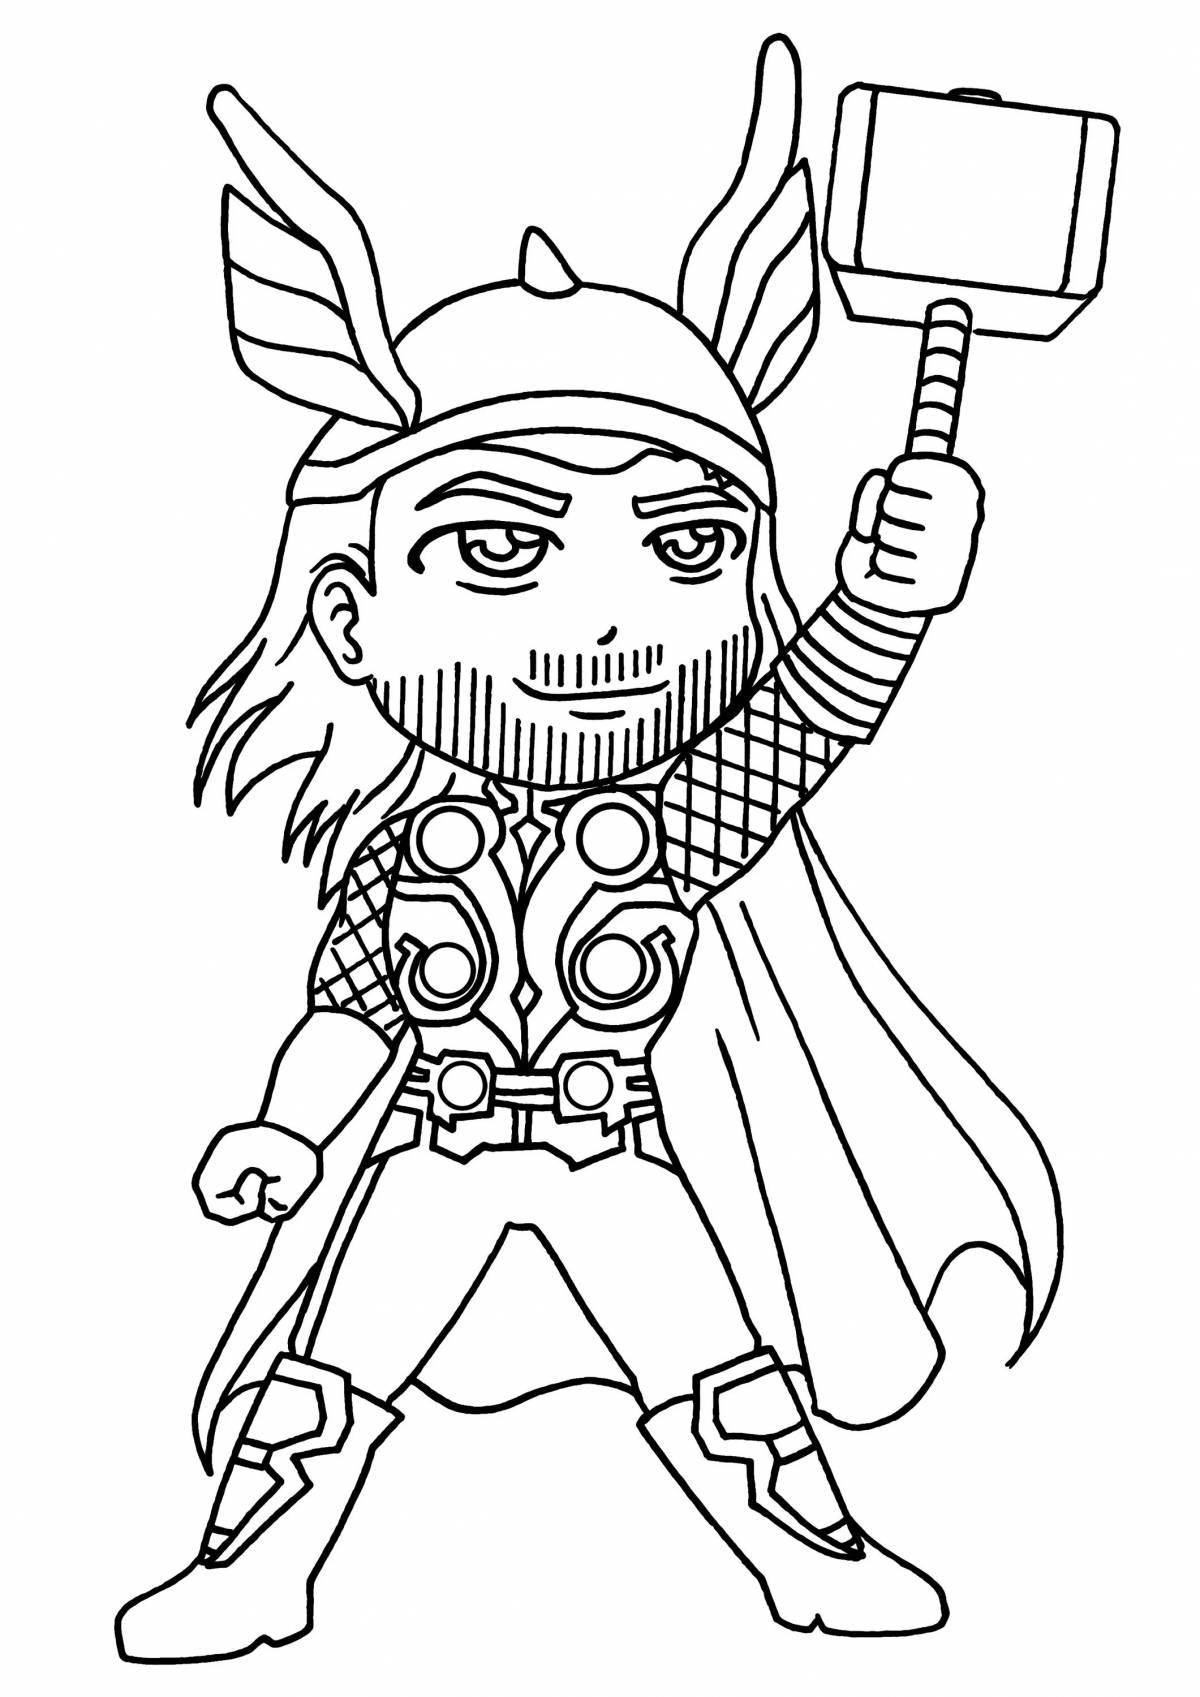 Small superhero coloring pages